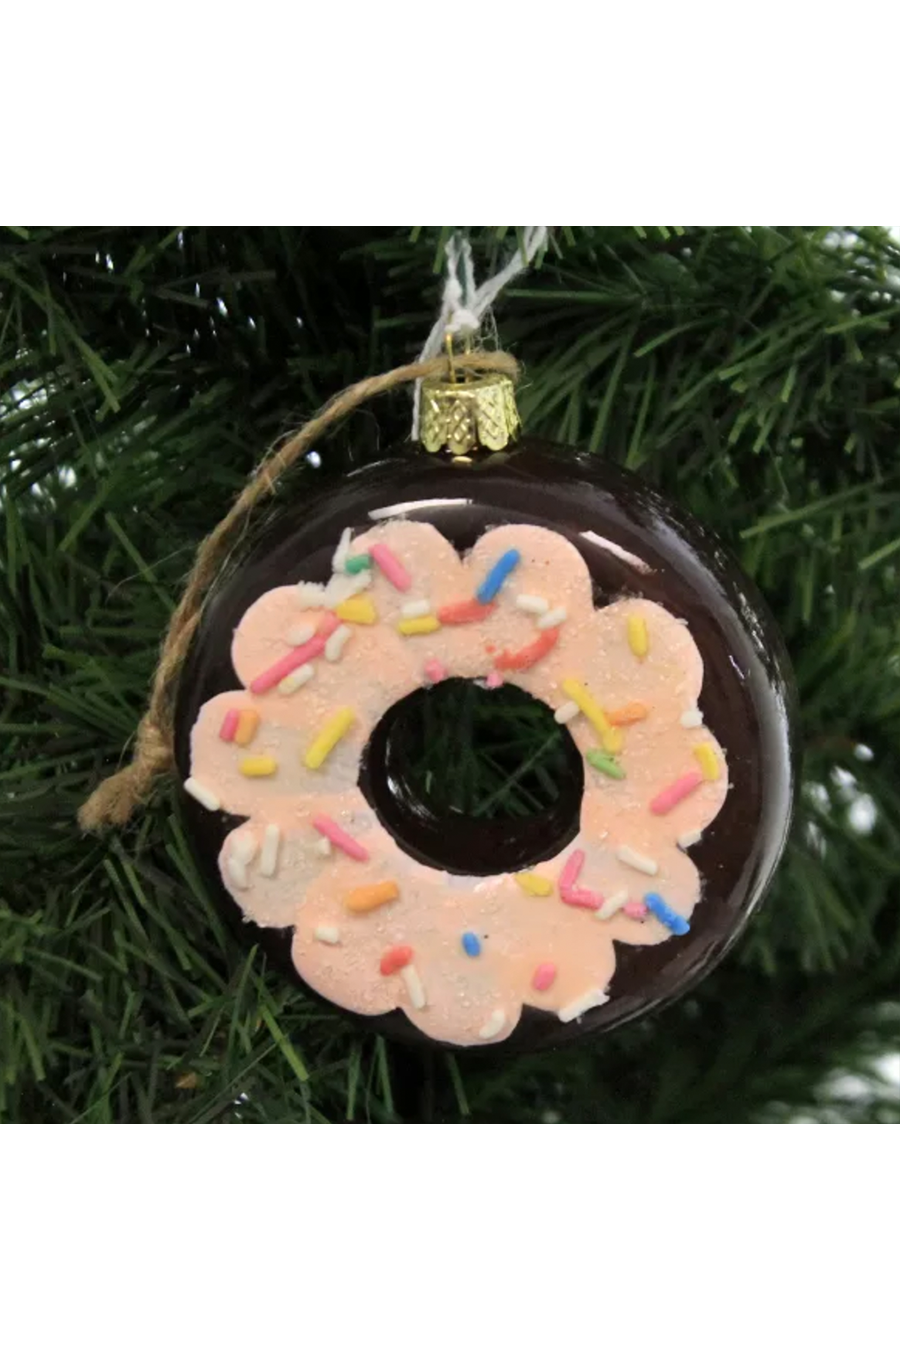 Assorted Donuts Ornament